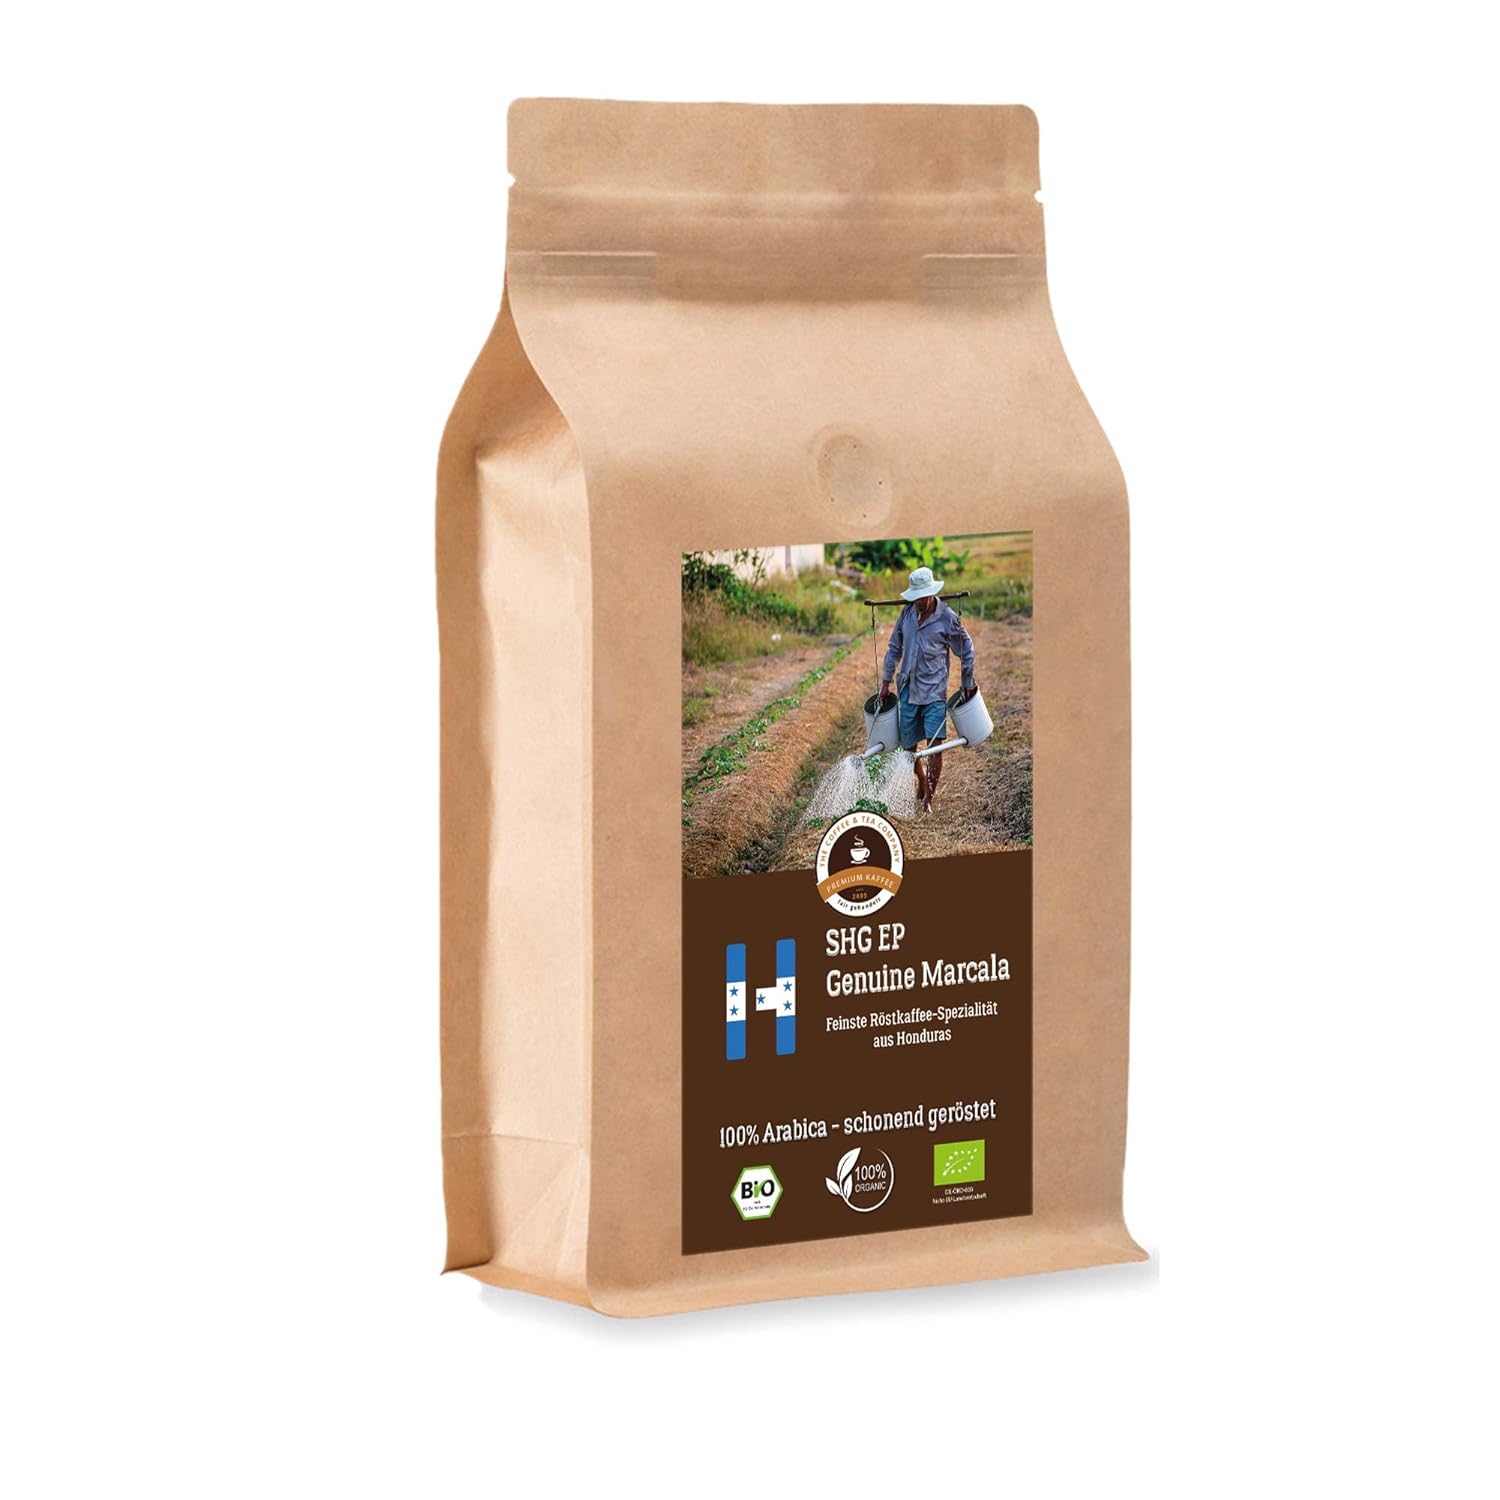 Coffee Globetrotter - Organic Honduras Genuine Marcala - 500 g Coarse Ground - for Stamp Jug French Press Coffee Maker - Top Coffee - Roasted Coffee from Organic Cultivation